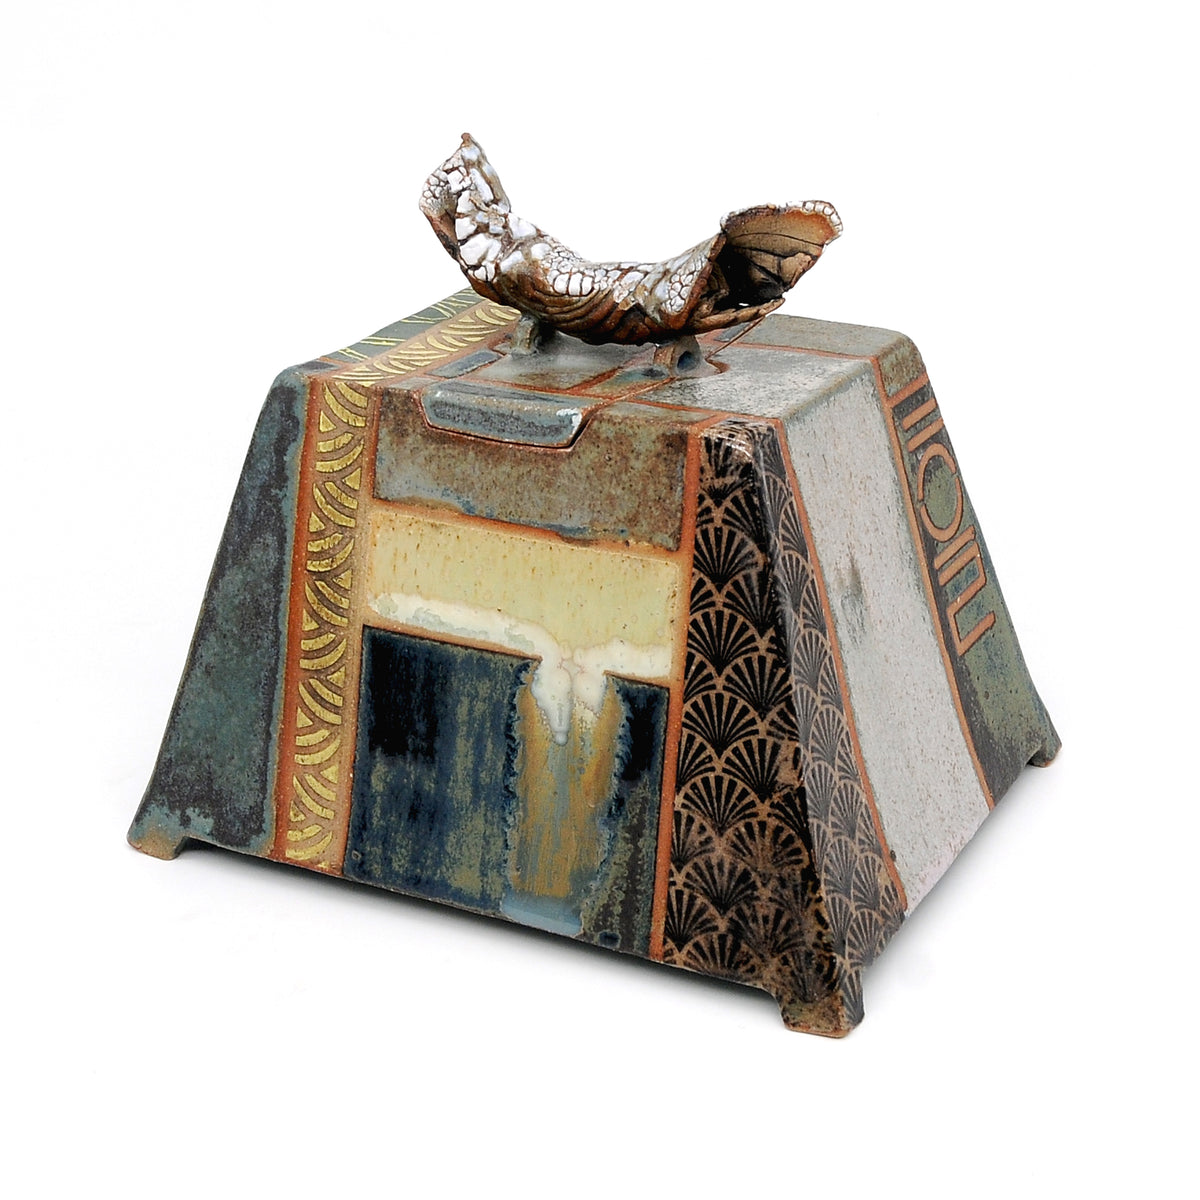 &#39;MK14 Large Box’ by Miae Kim ceramics, available at Padstow Gallery, Cornwall